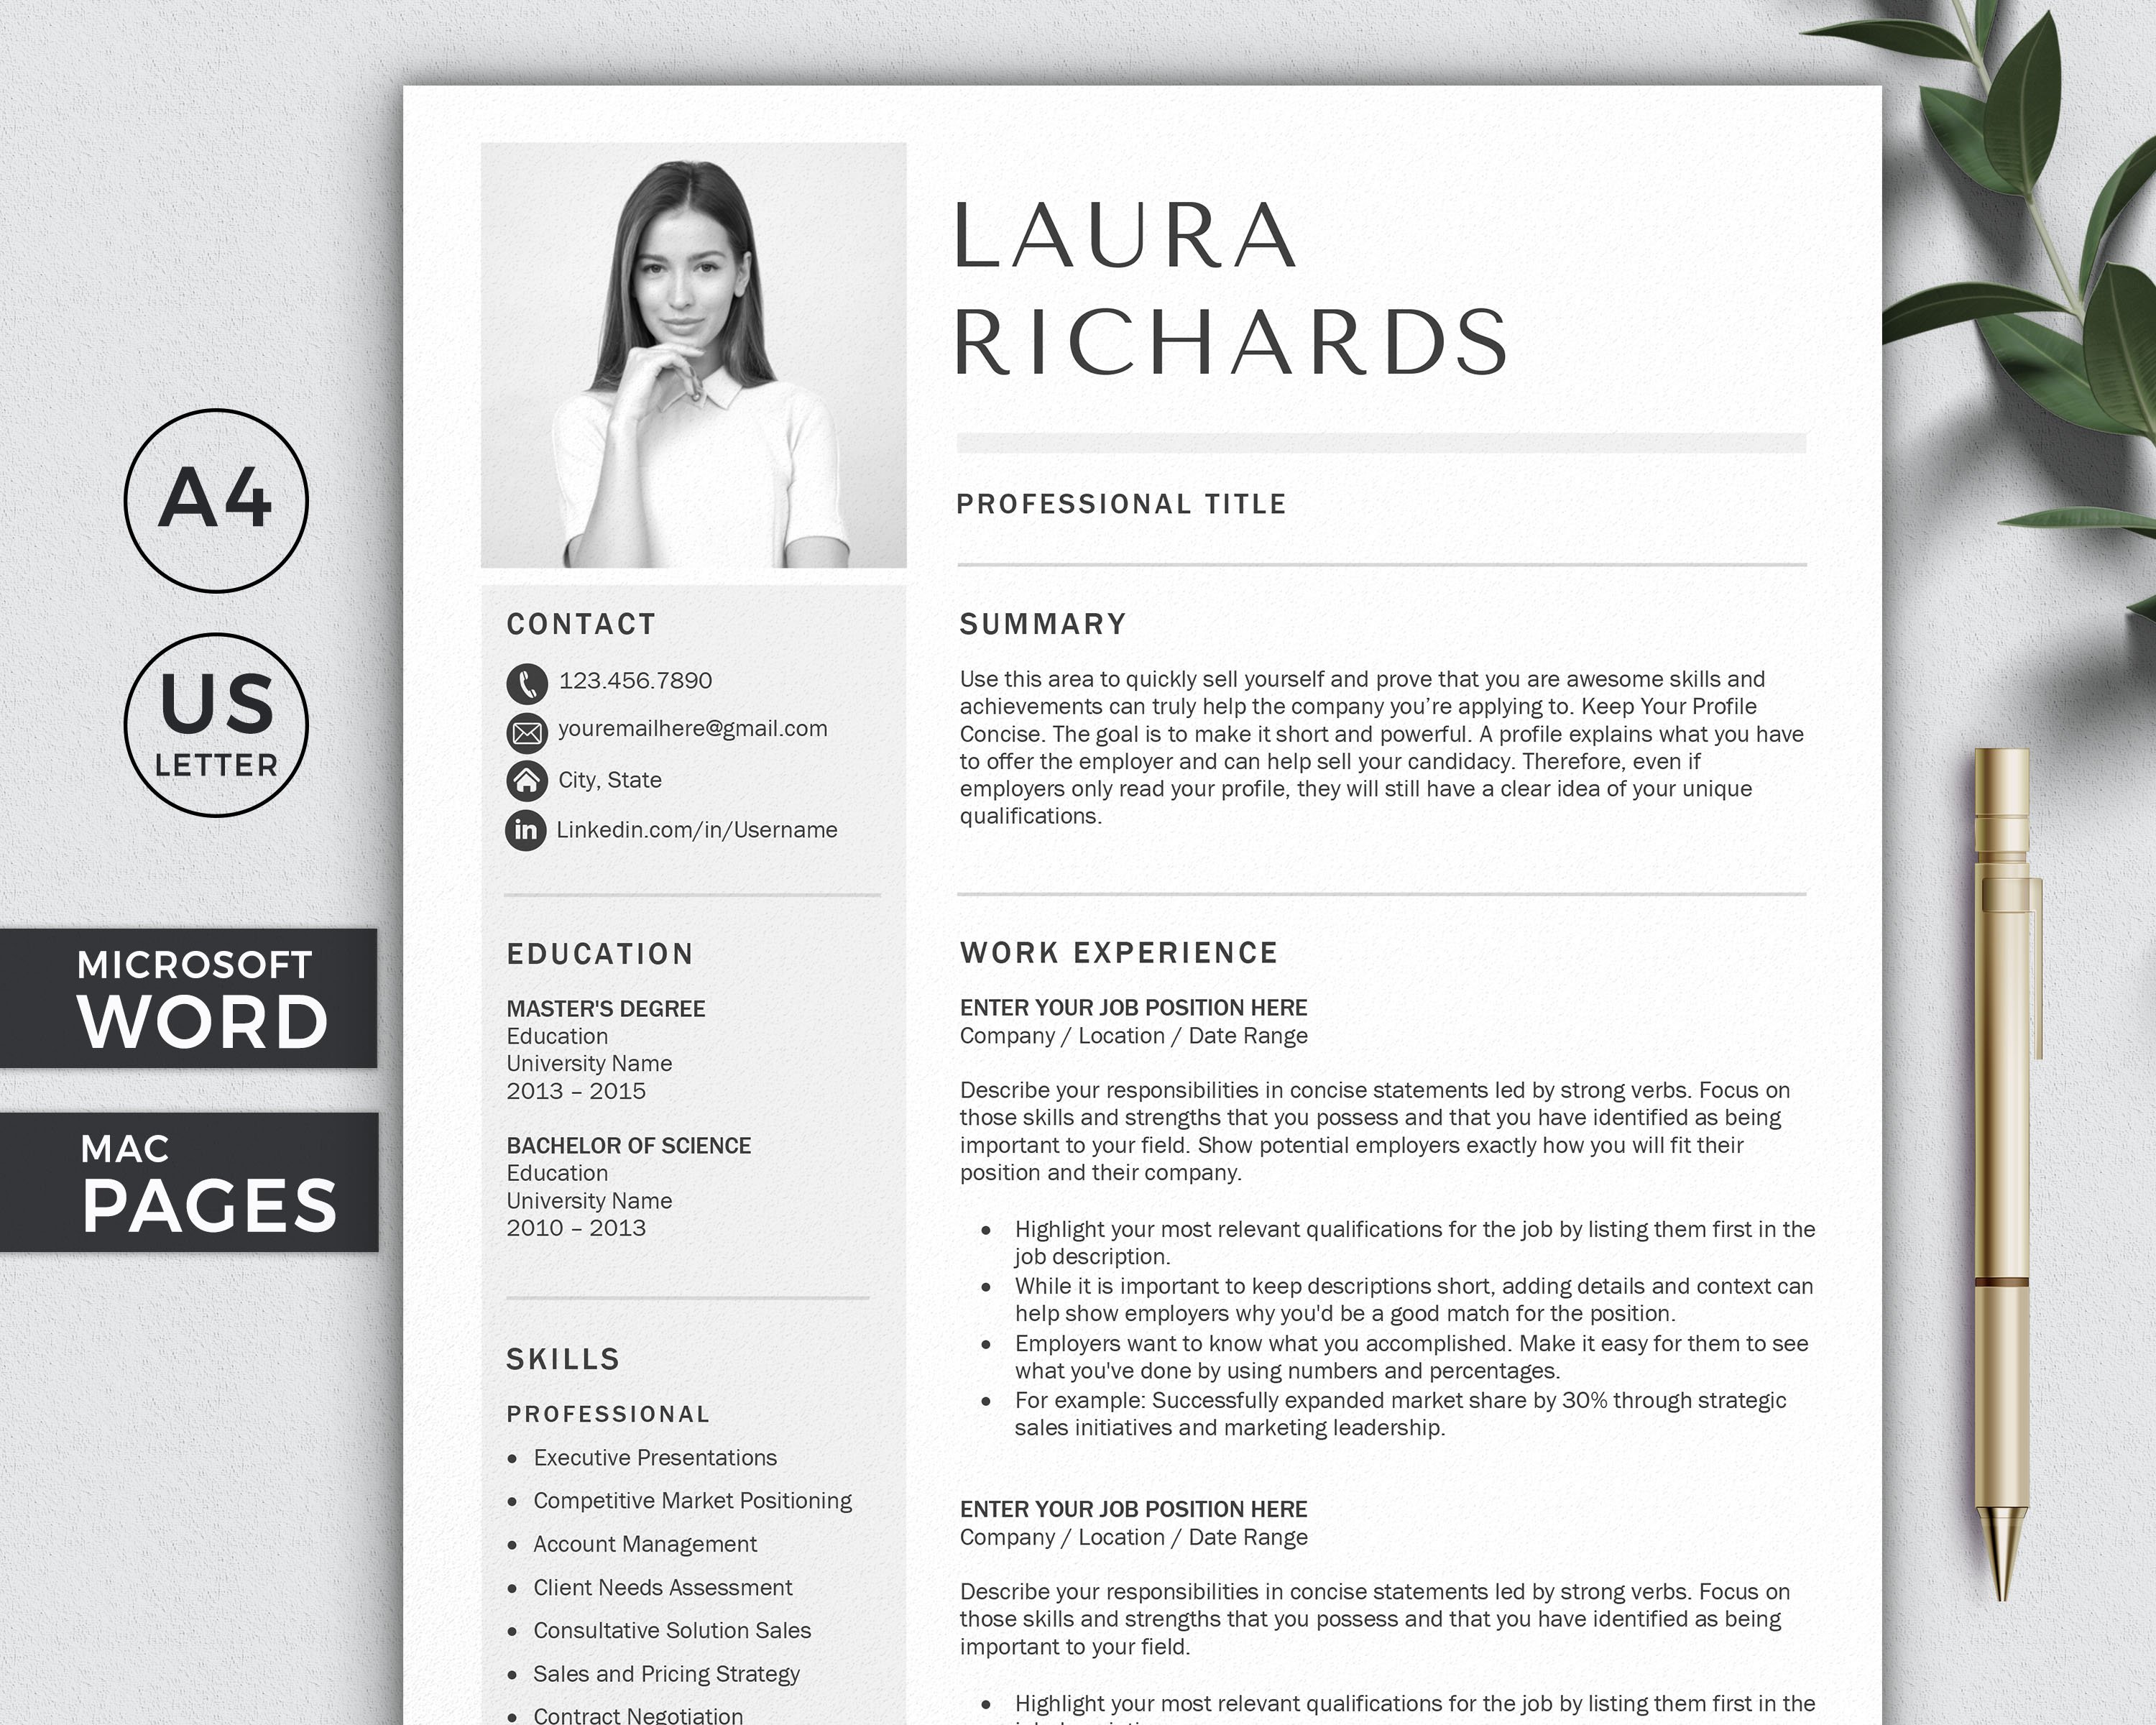 Resume Template CV + Cover Letter cover image.